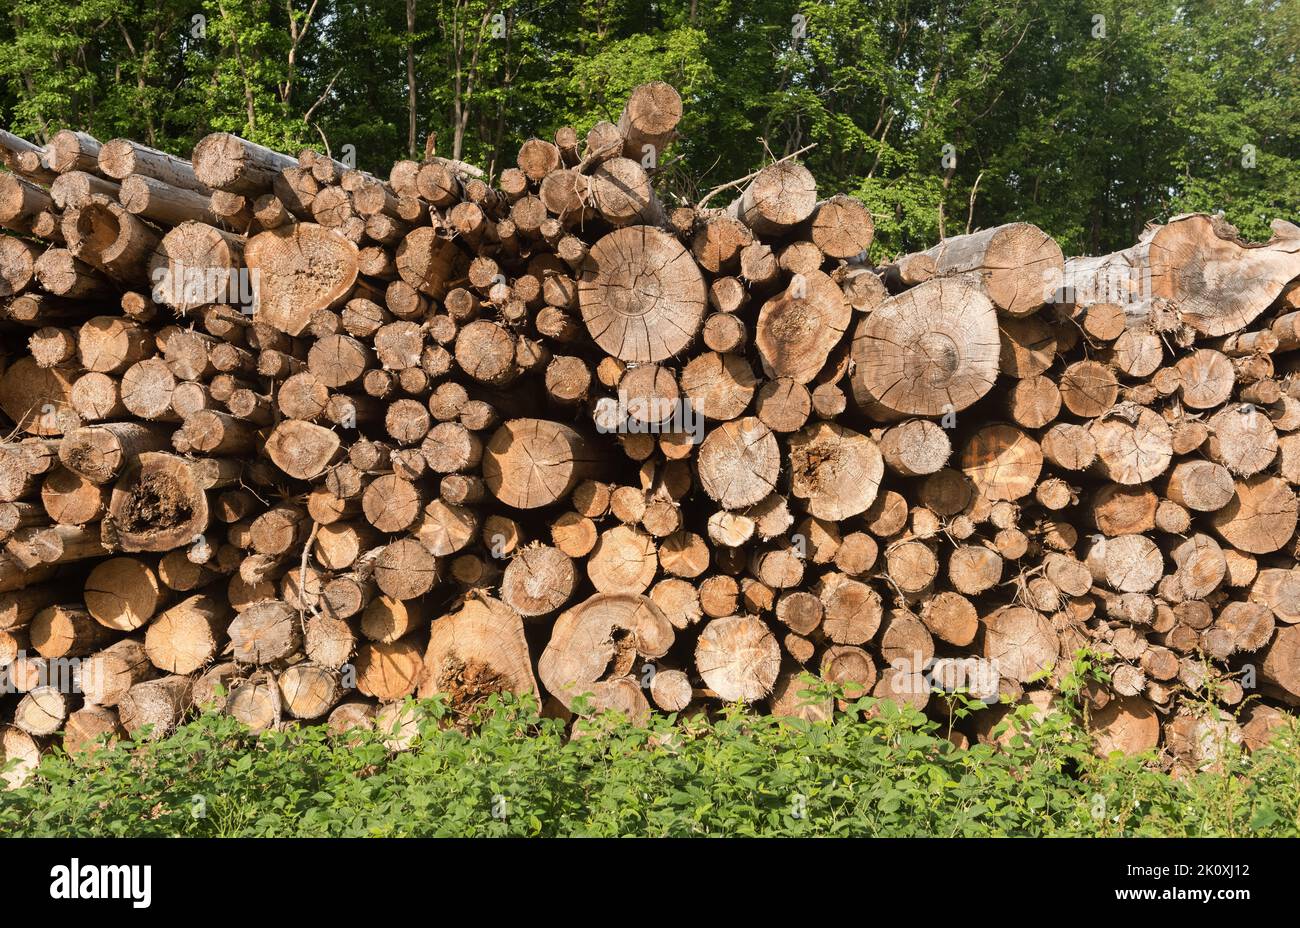 Pile of felled trees at a logging site in a forest in the countryside Stock Photo